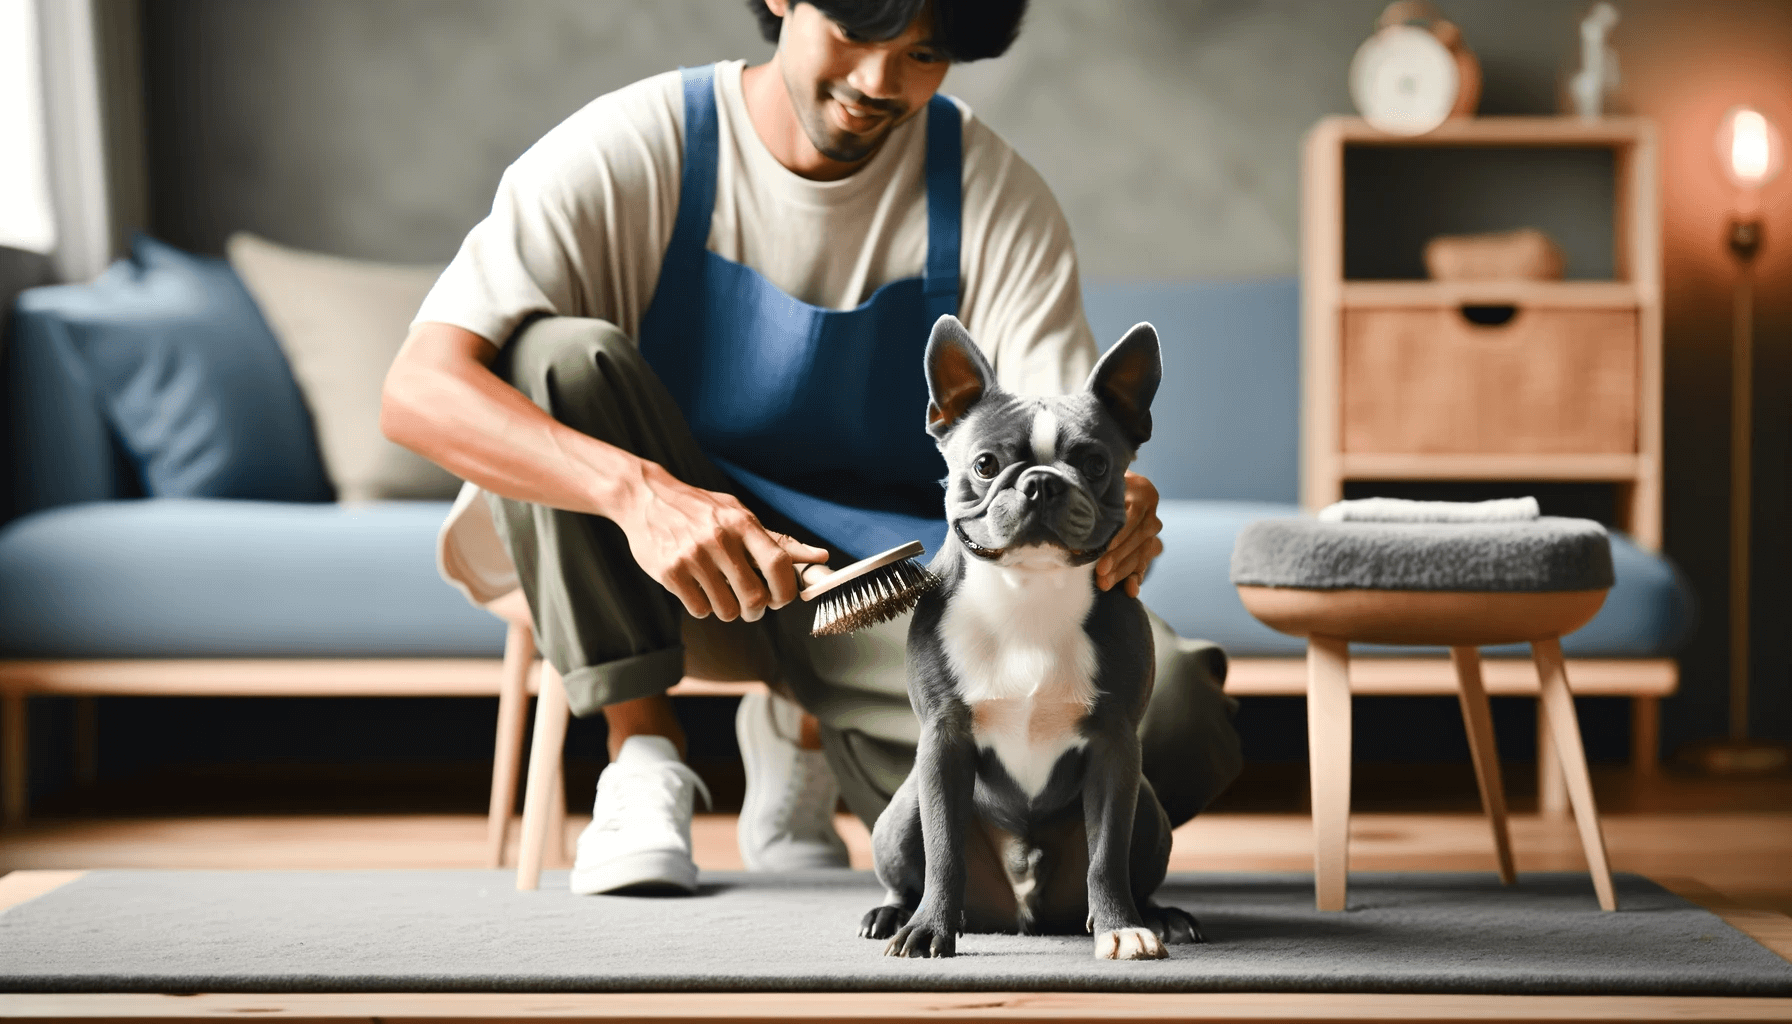 A Blue Boston Terrier being groomed by its owner at home.